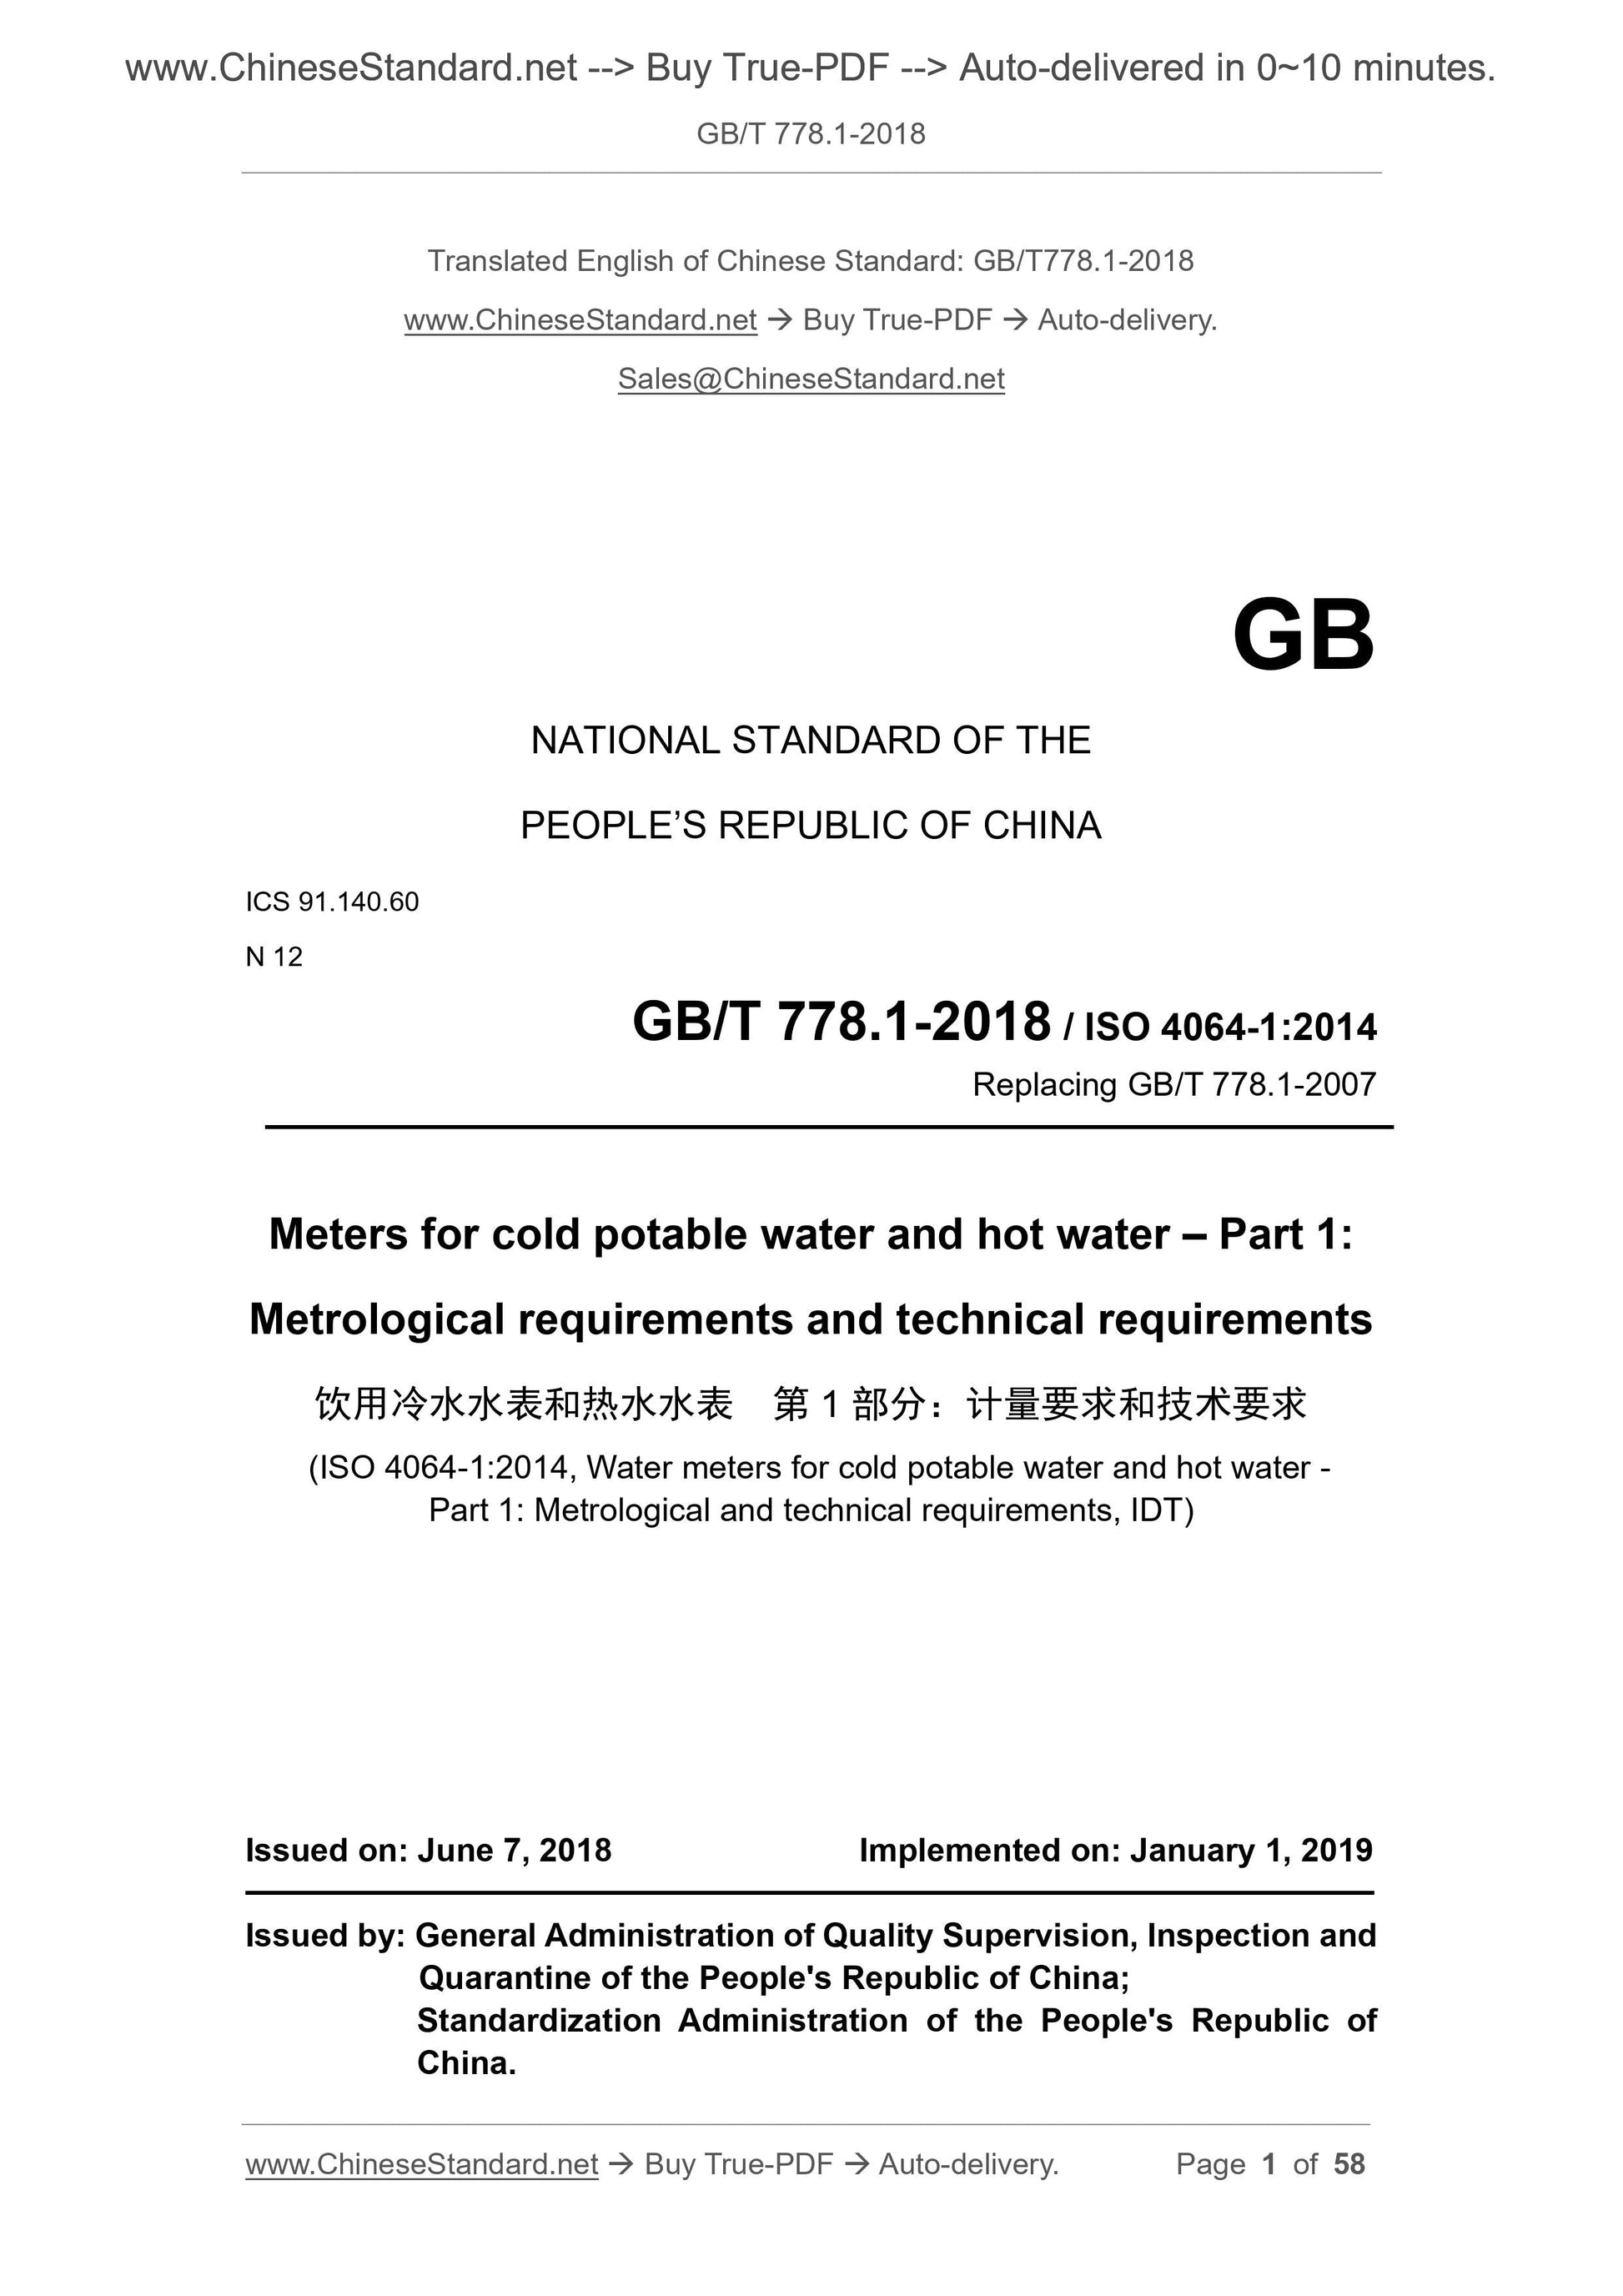 GB/T 778.1-2018 Page 1